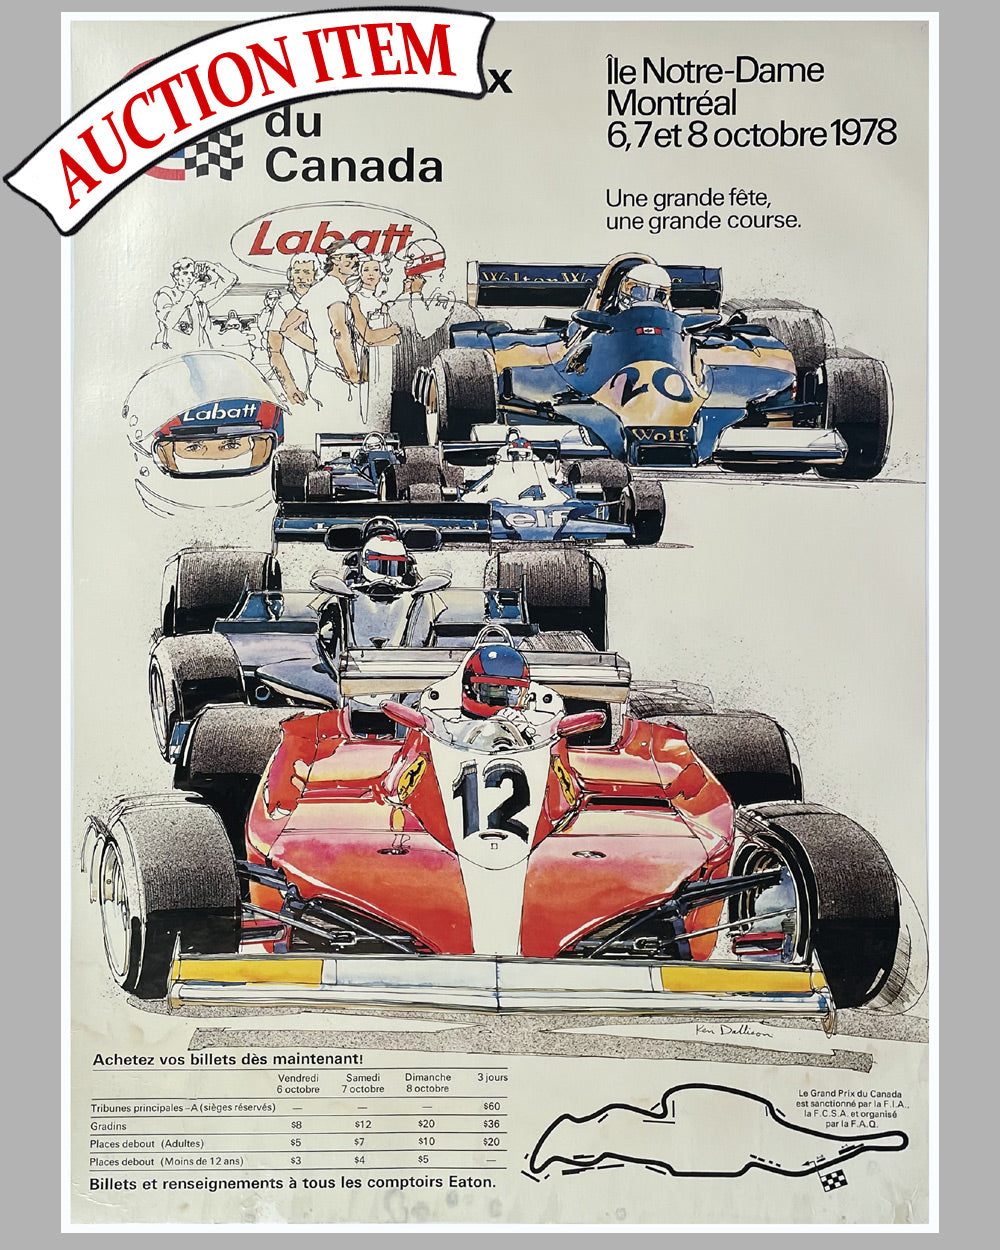 8 - The 1st Grand Prix of Montreal 1978 official race poster by Canadian artist Ken Dallison